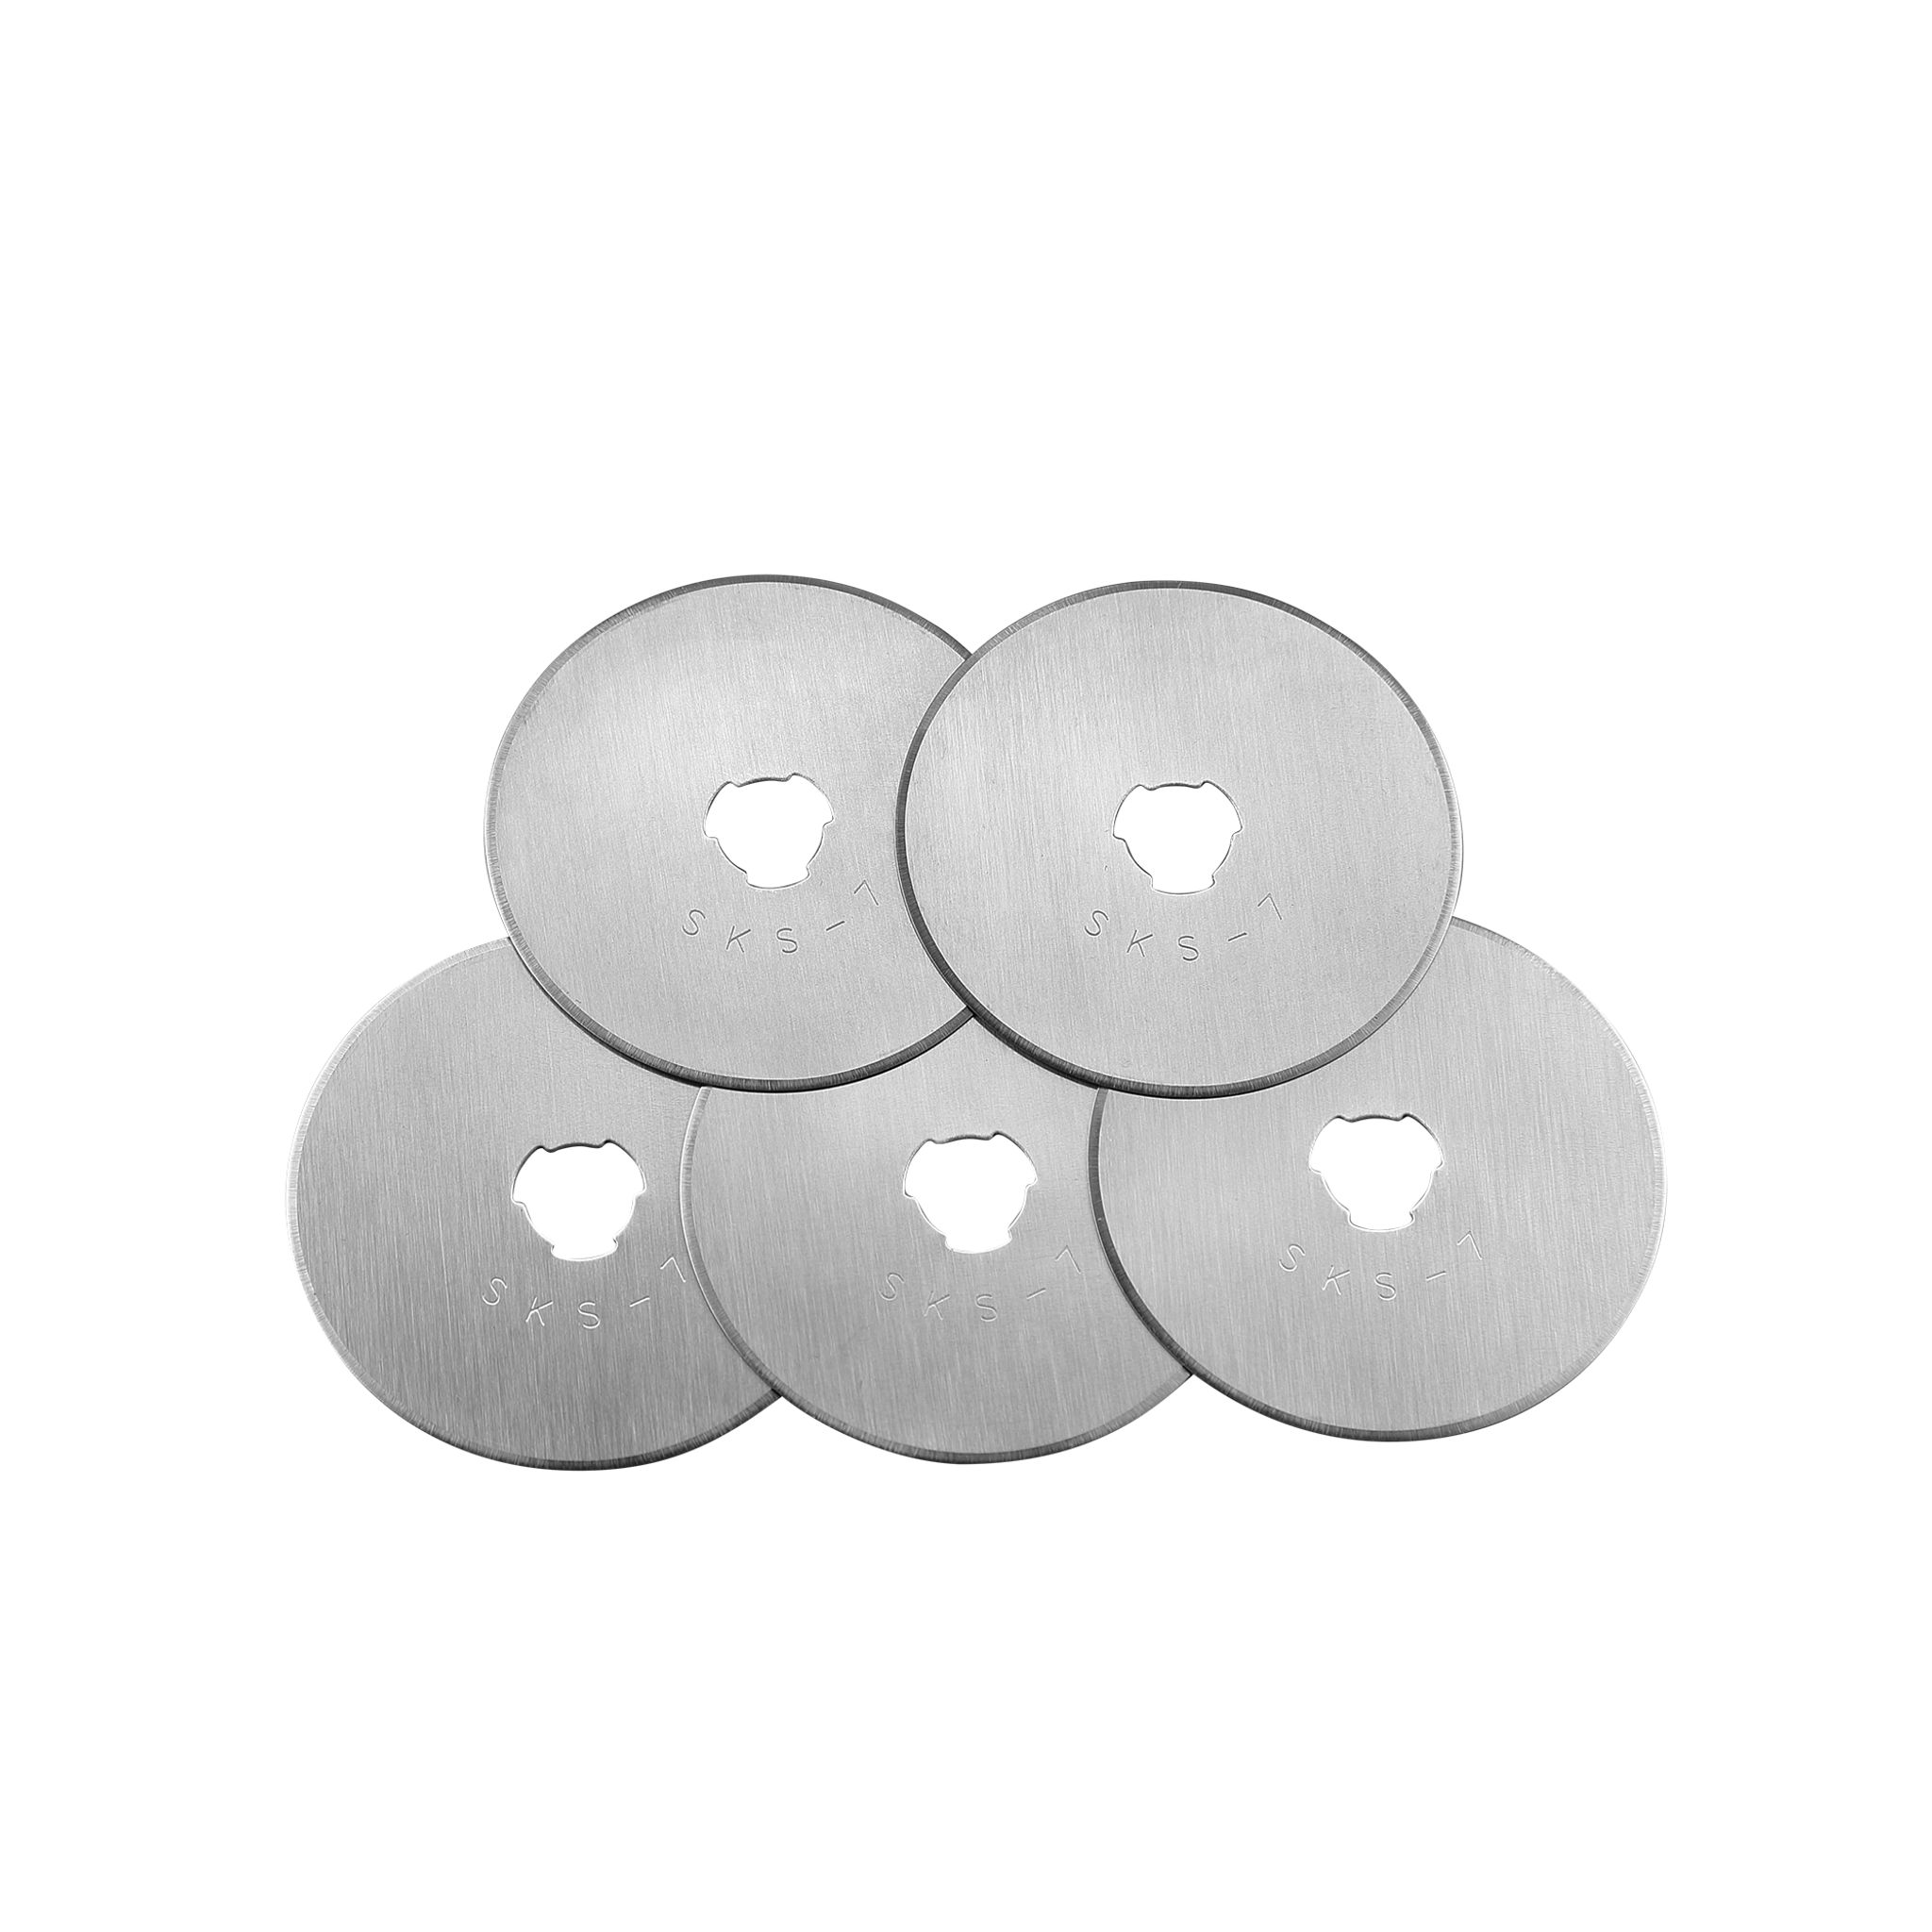 45mm Rotary Cutter Refill, 5-pack